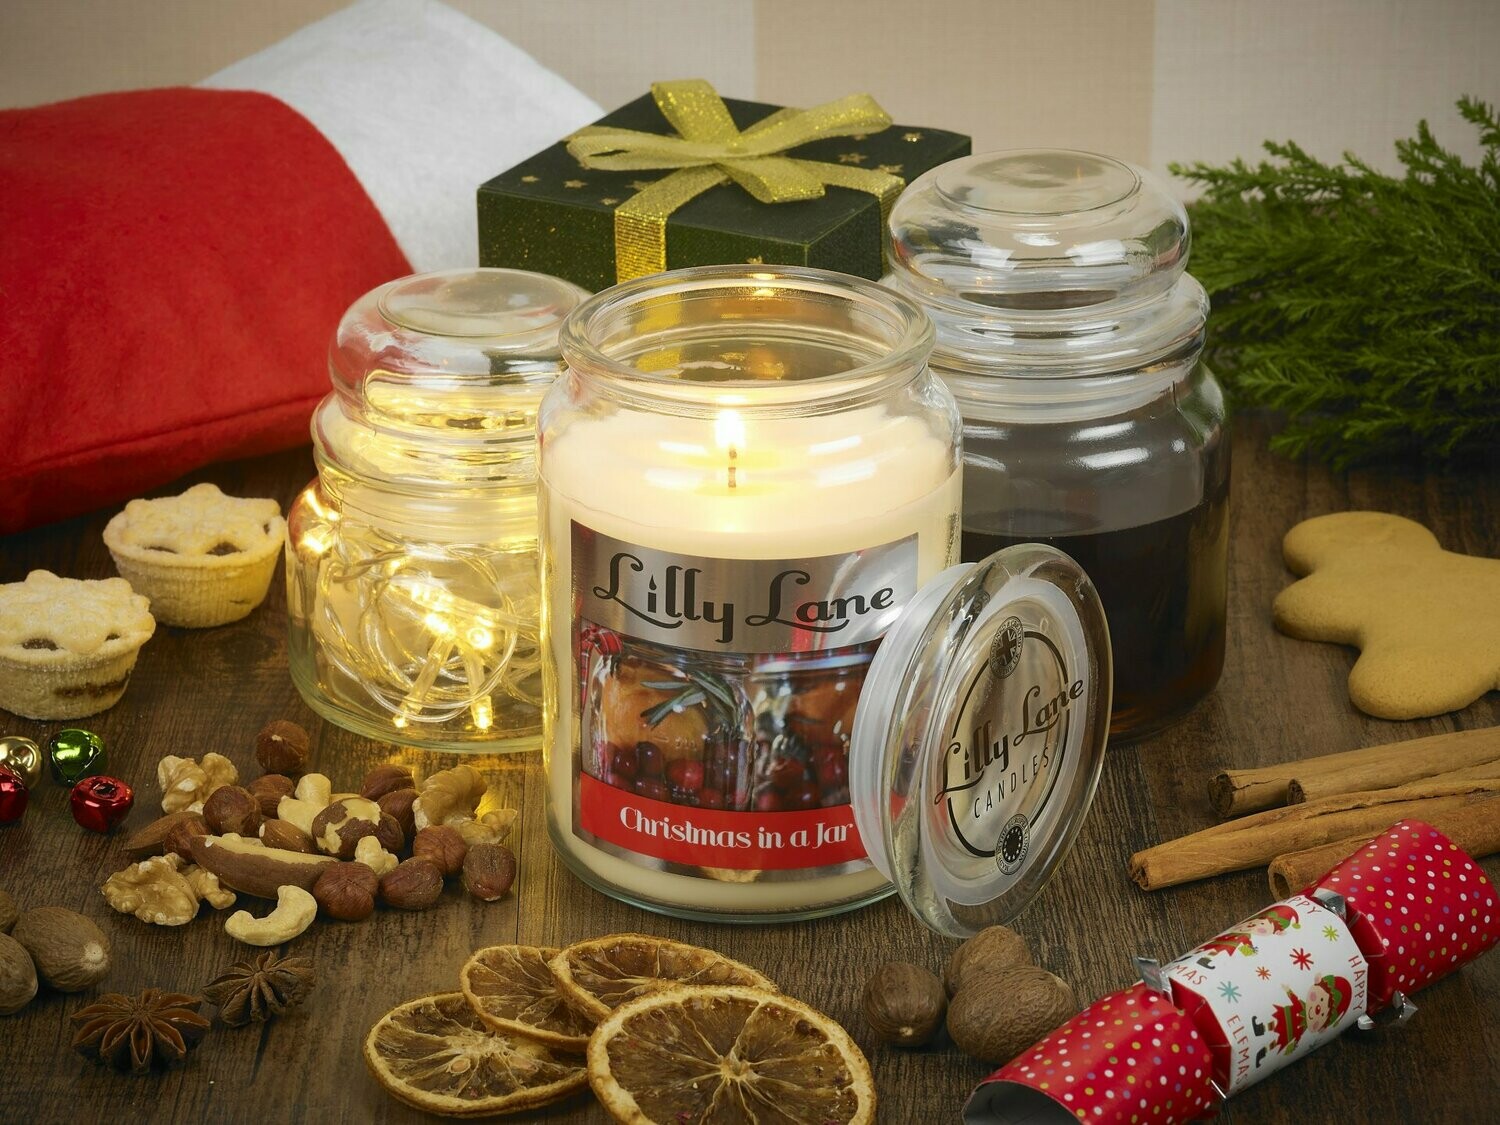 Lilly Lane Christmas In A Jar 18oz Jar Candle